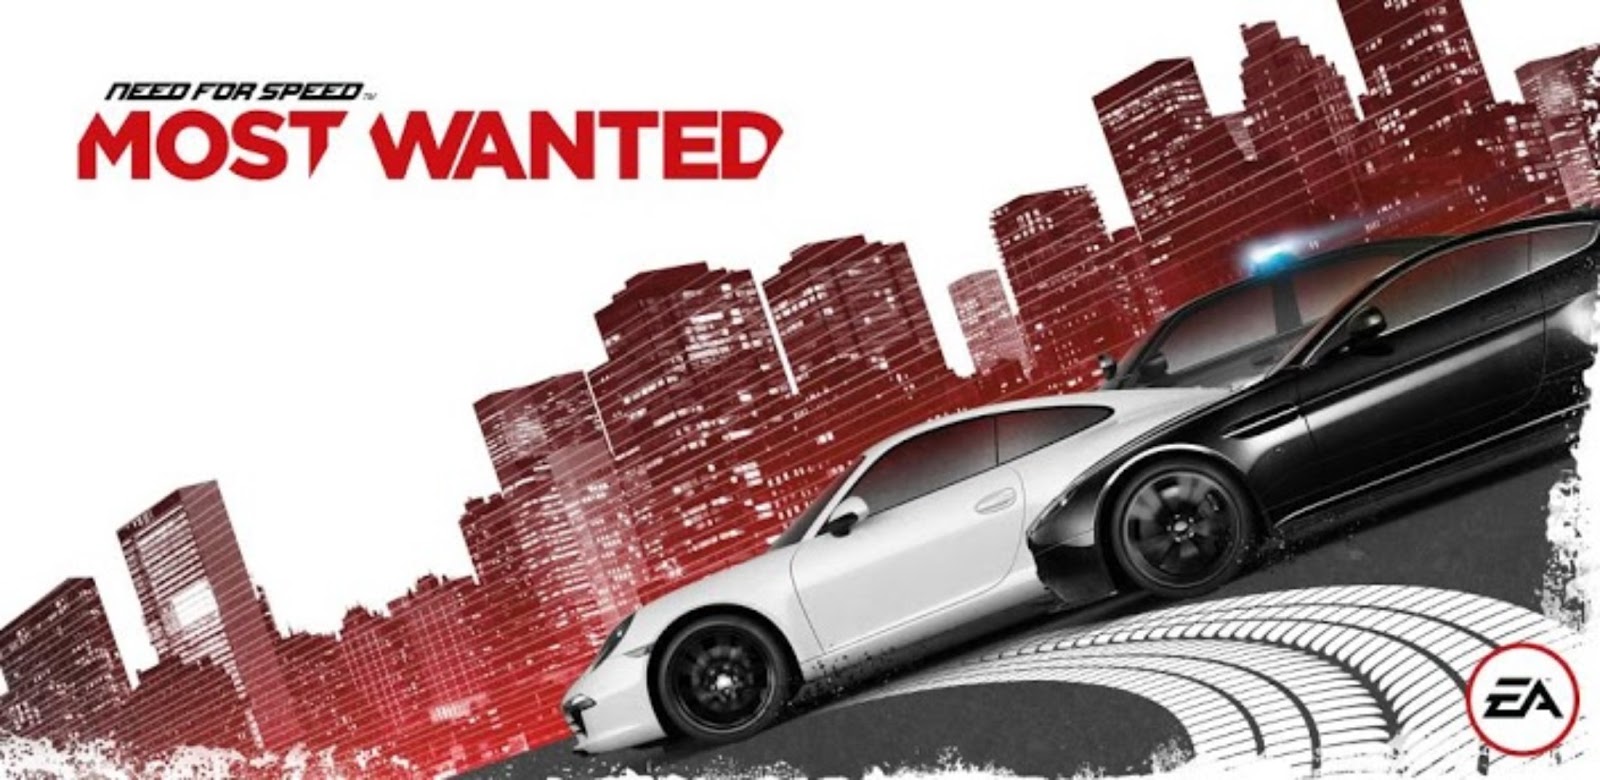 Need for Speed Most Wanted Remake — Info Dump or New Hope?…, by Ask4Games